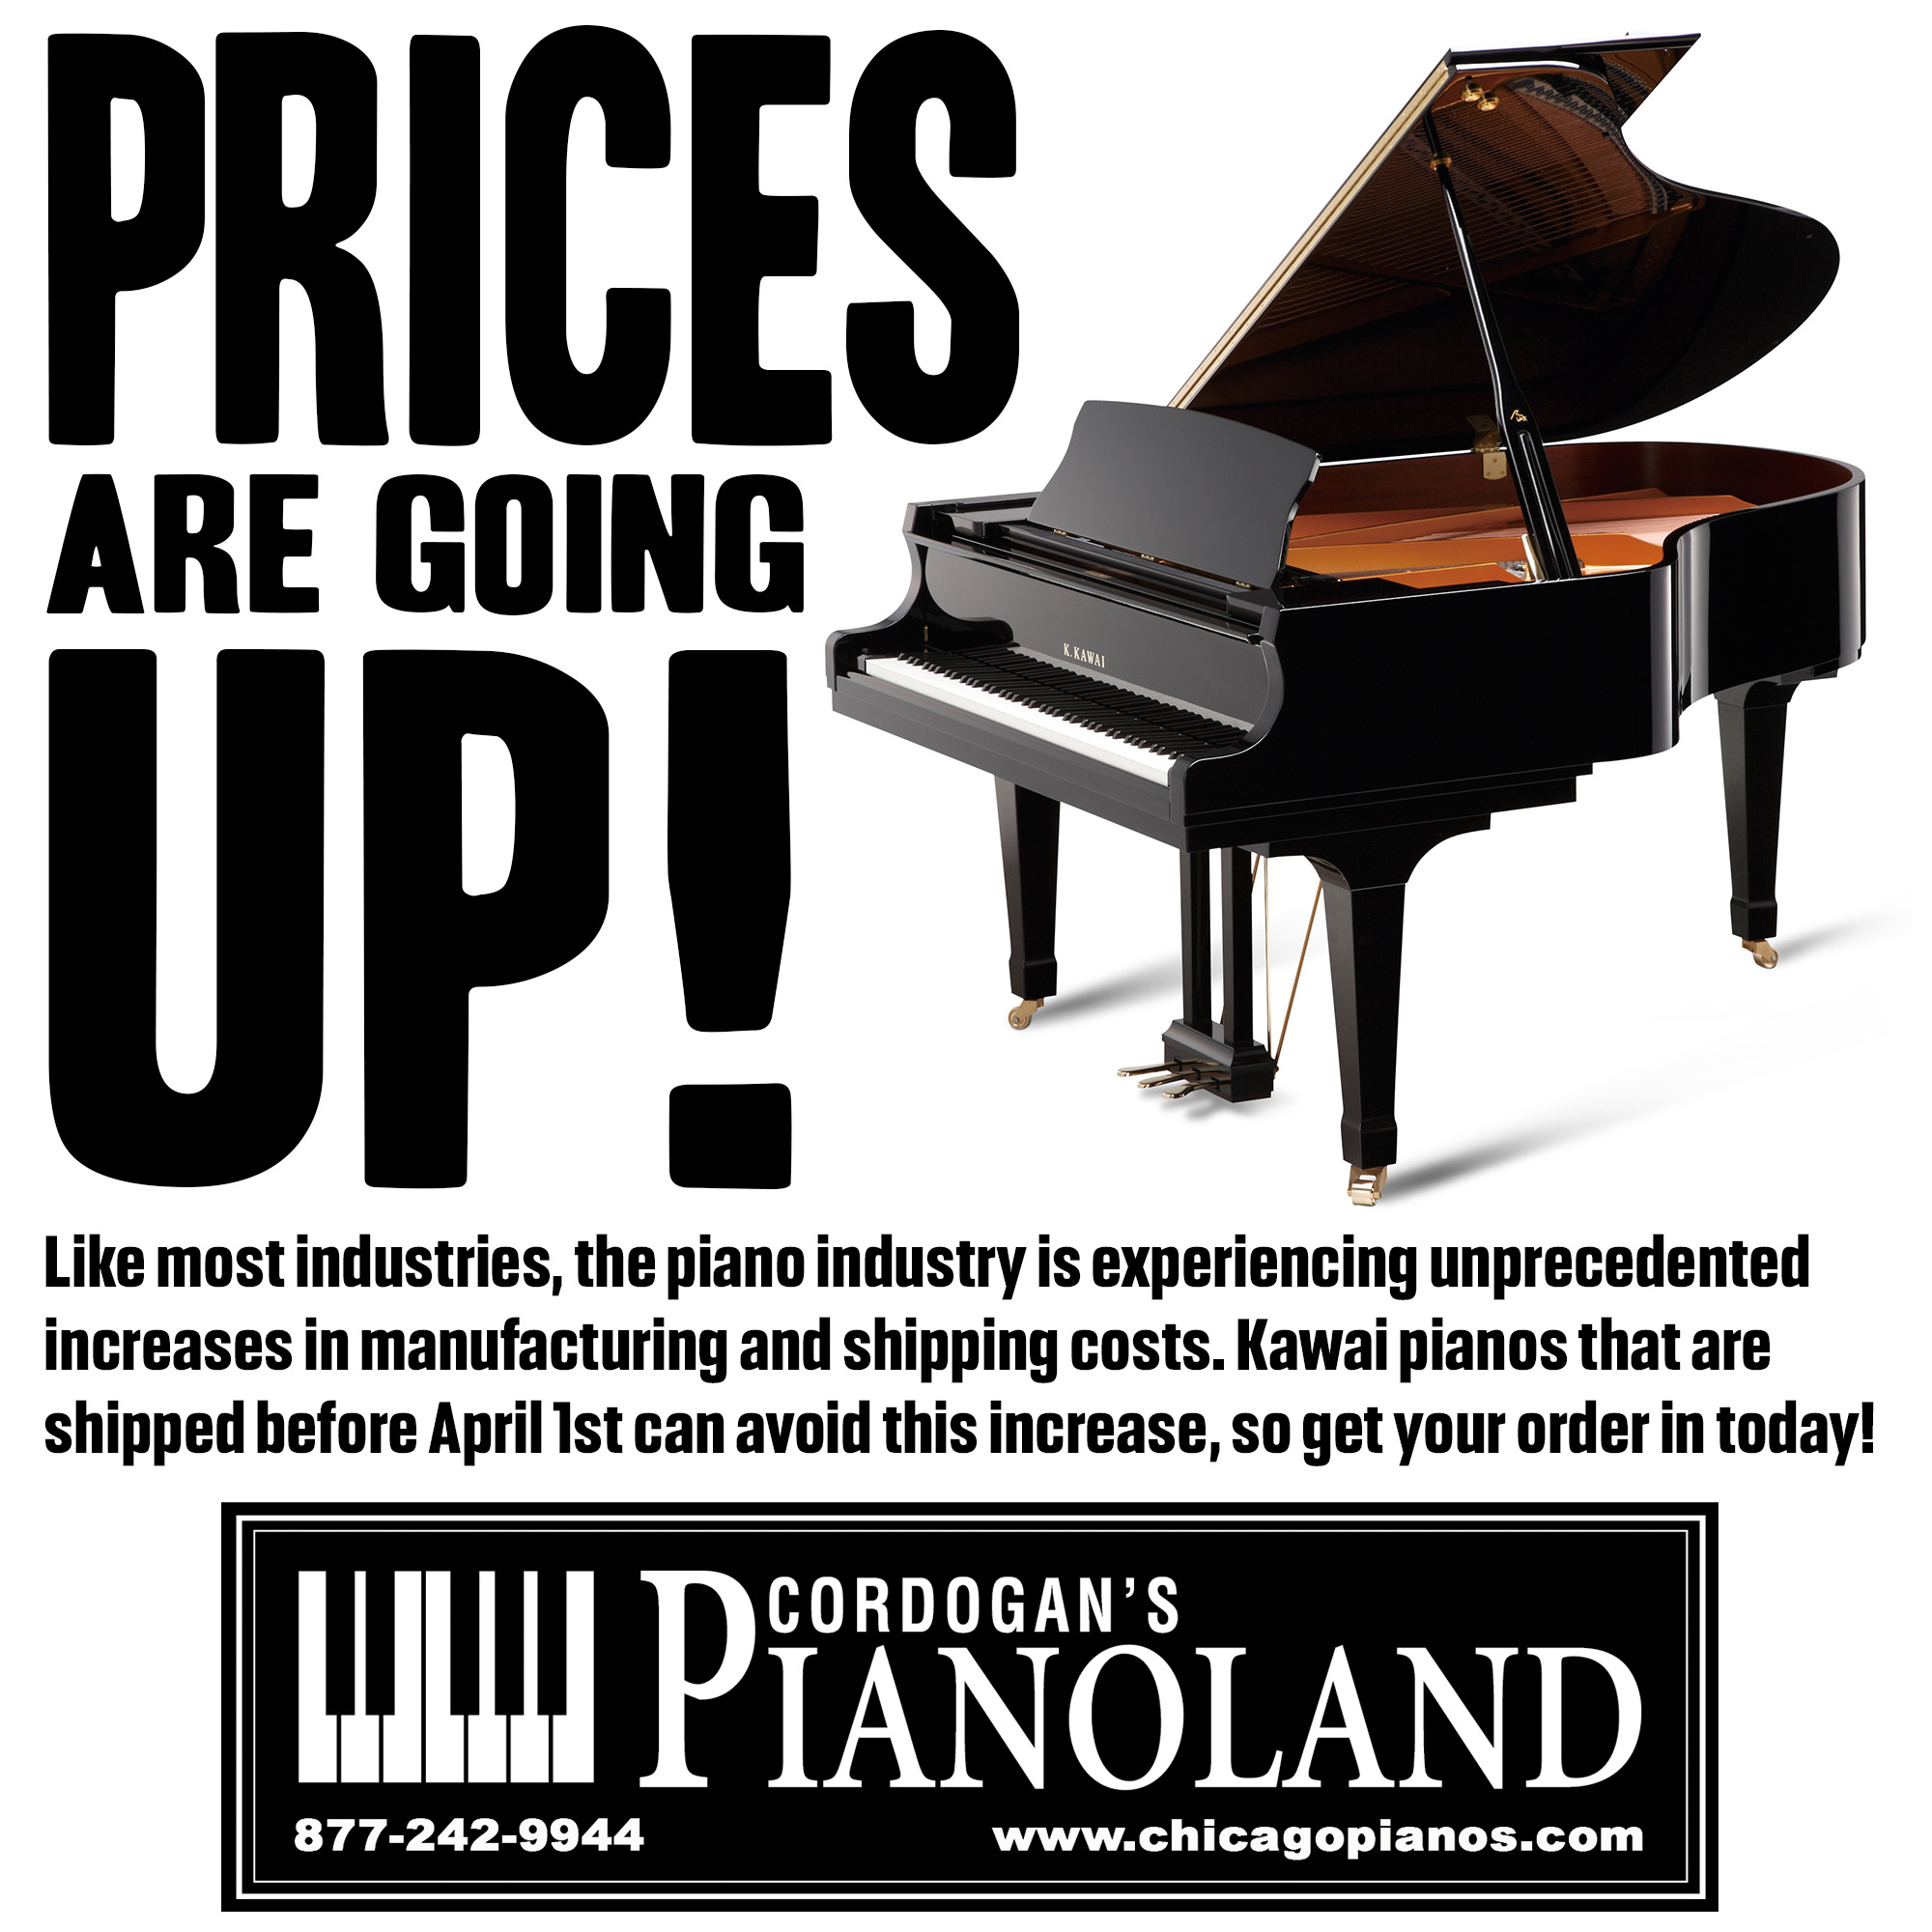 old pianos wanted ads